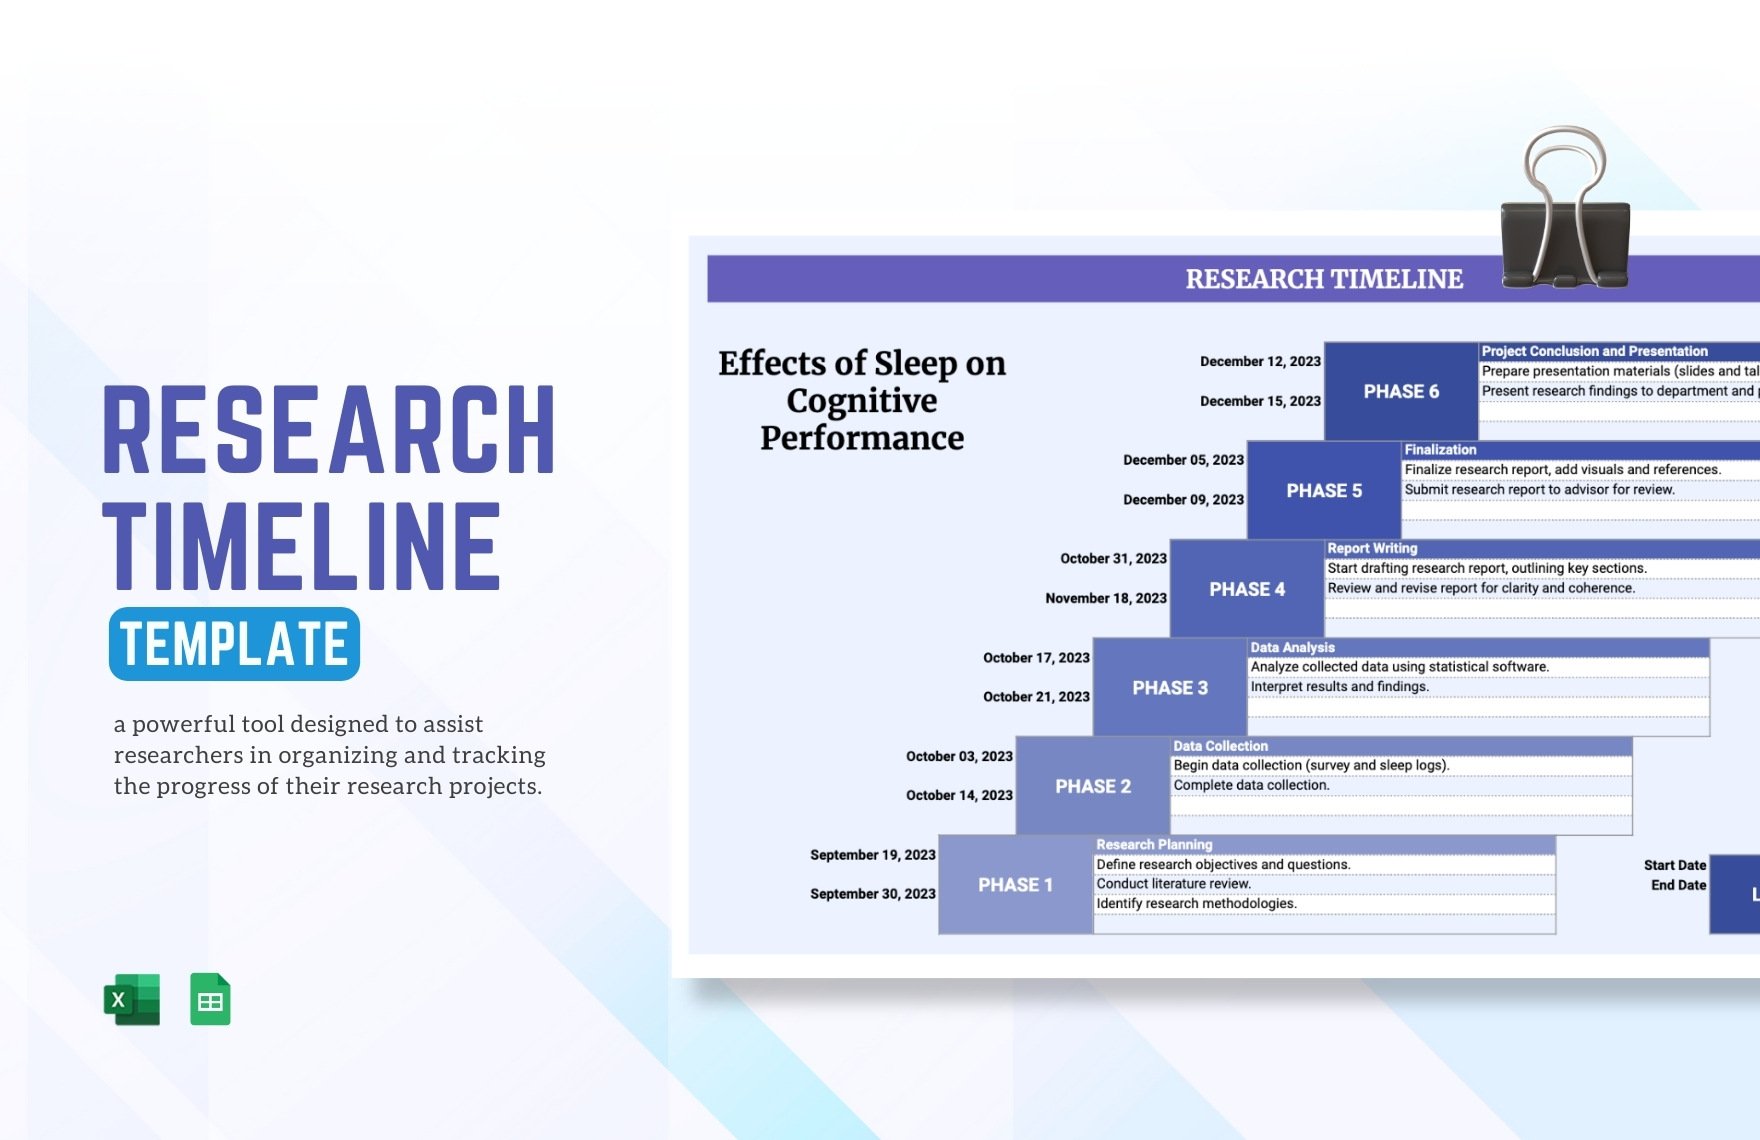 Research Timeline Template